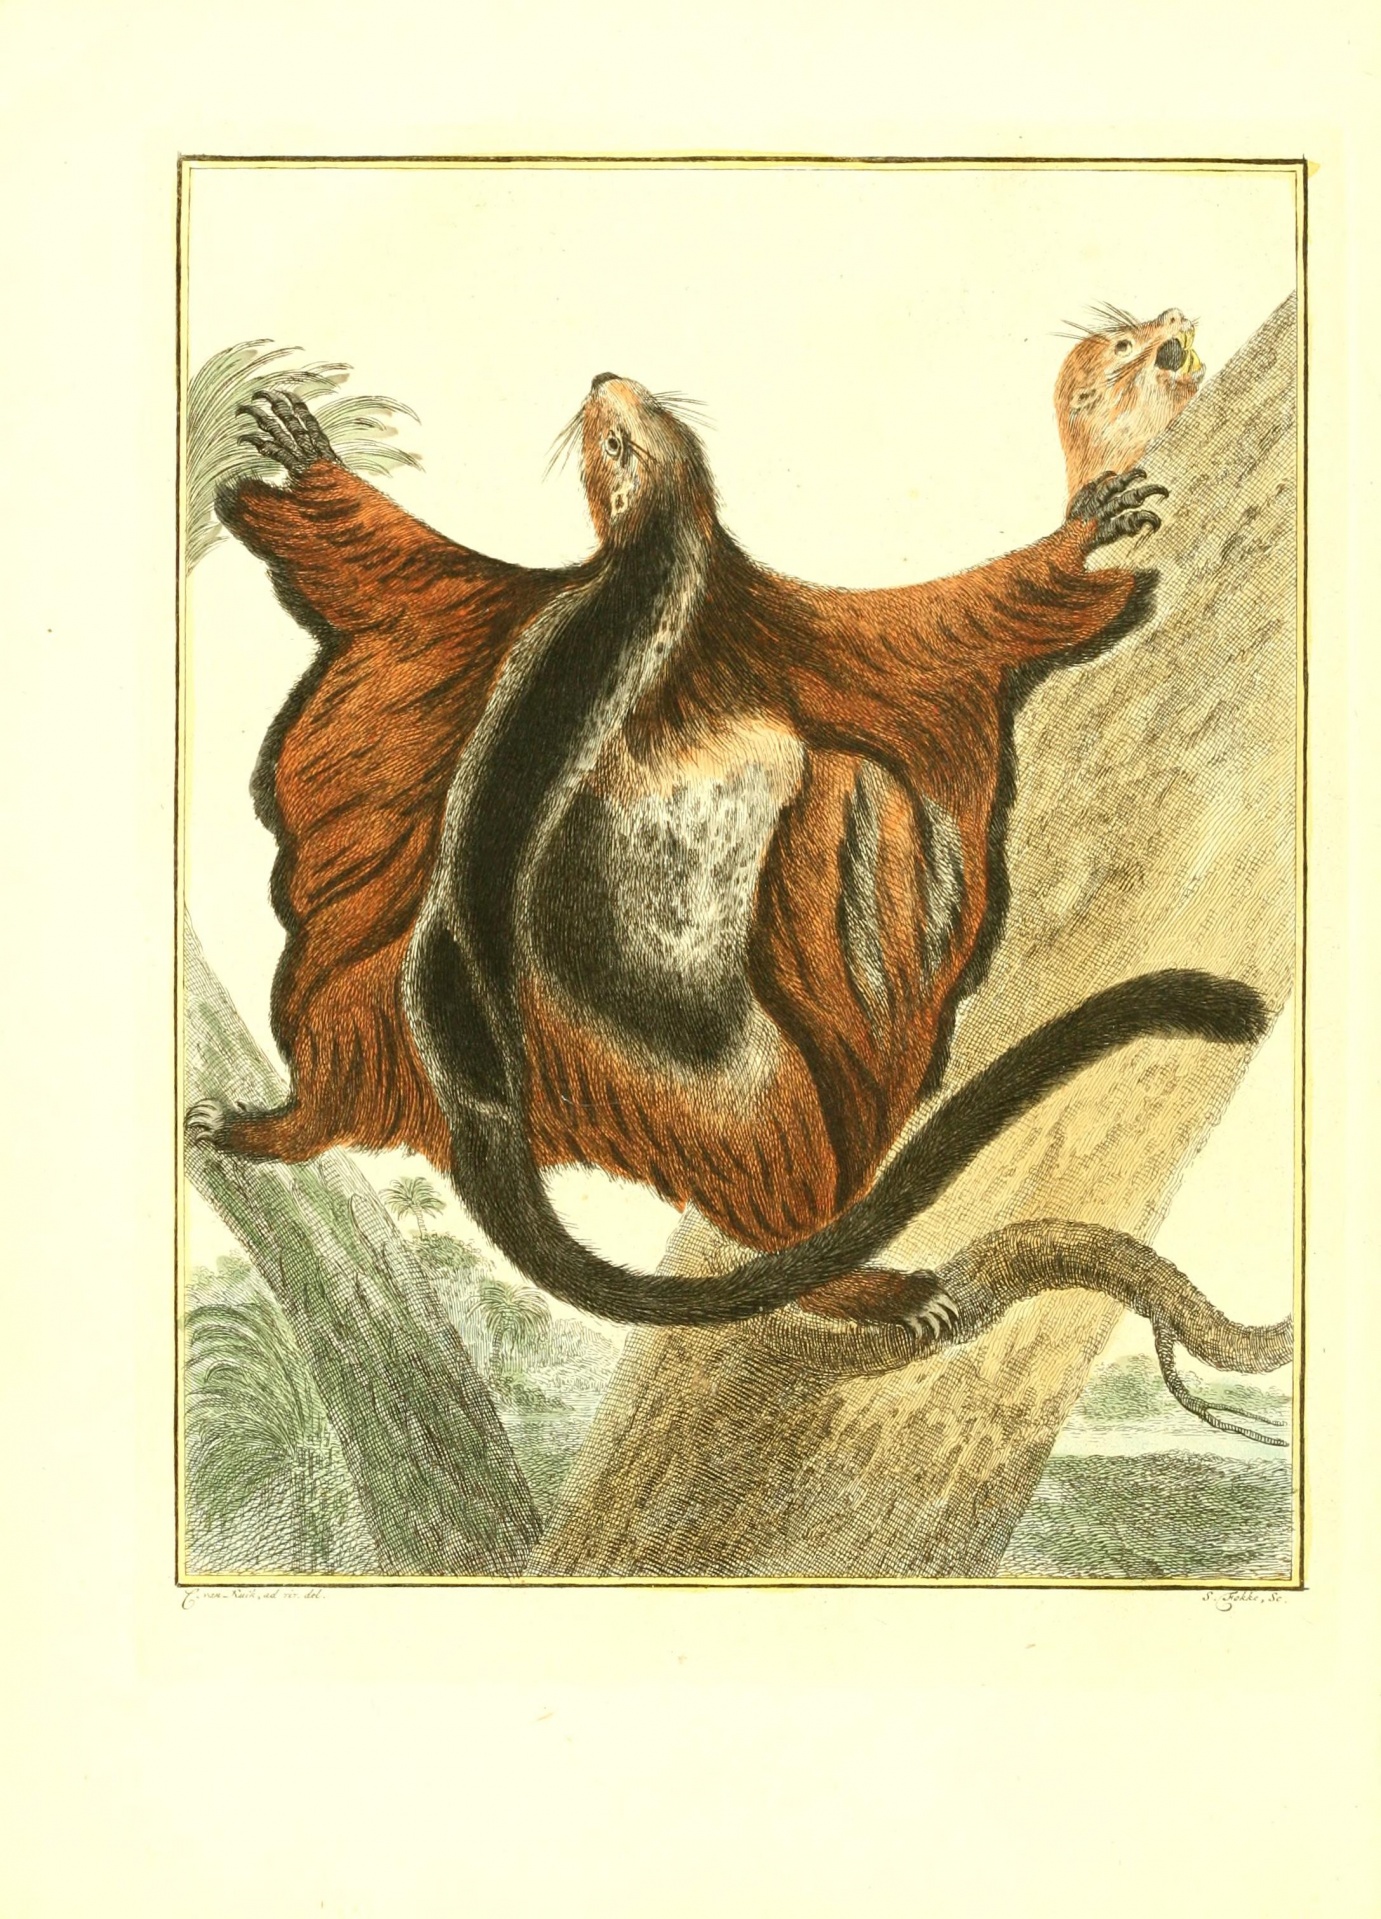 The Flying Squirrel, Biodiversity Heritage Library